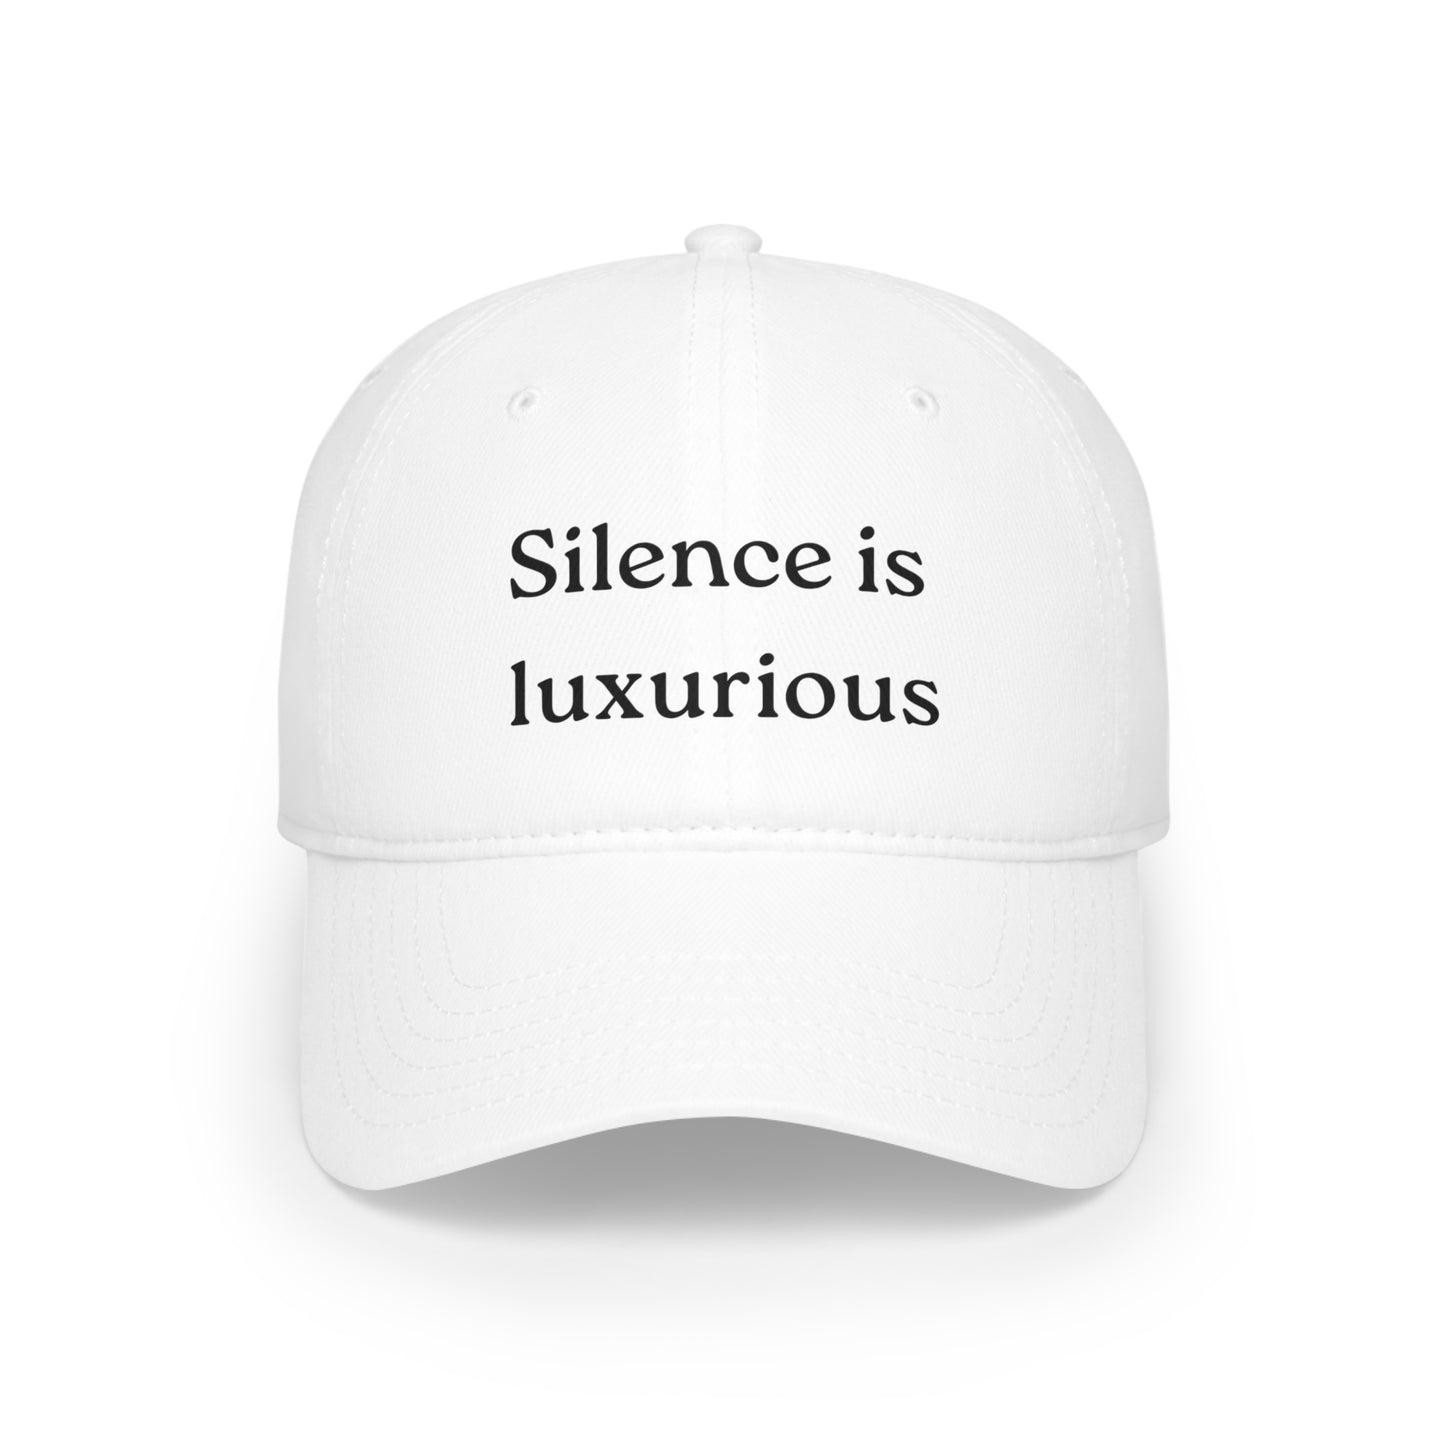 Silence is Lux Cap